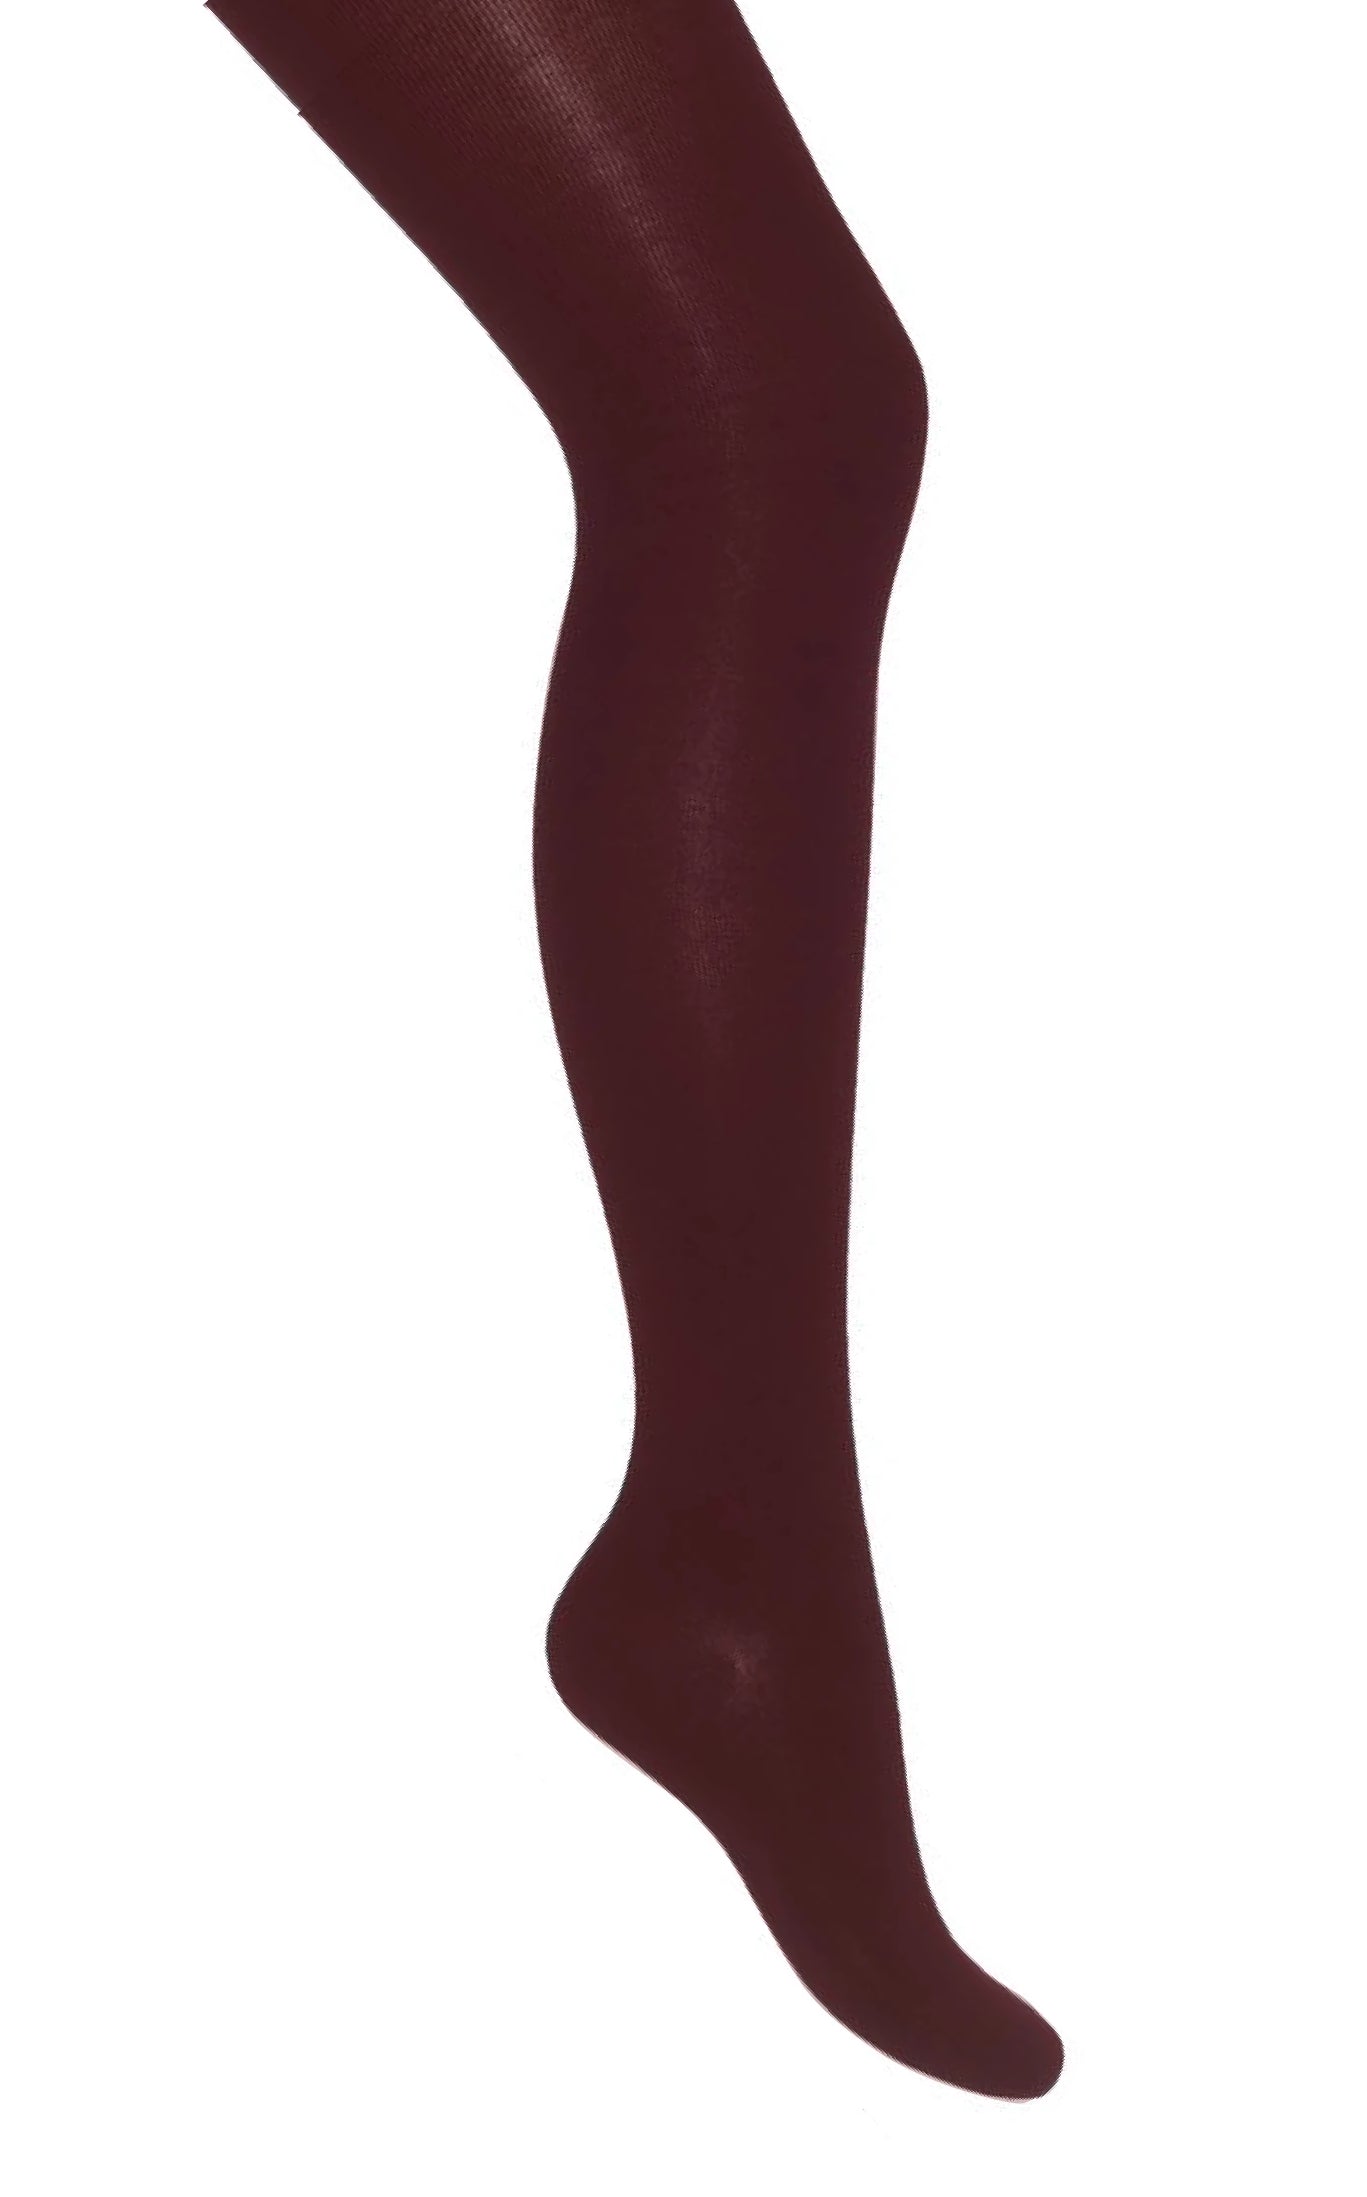 Bonnie Doon Cotton Tights - wine knitted Winter thermal warm tights